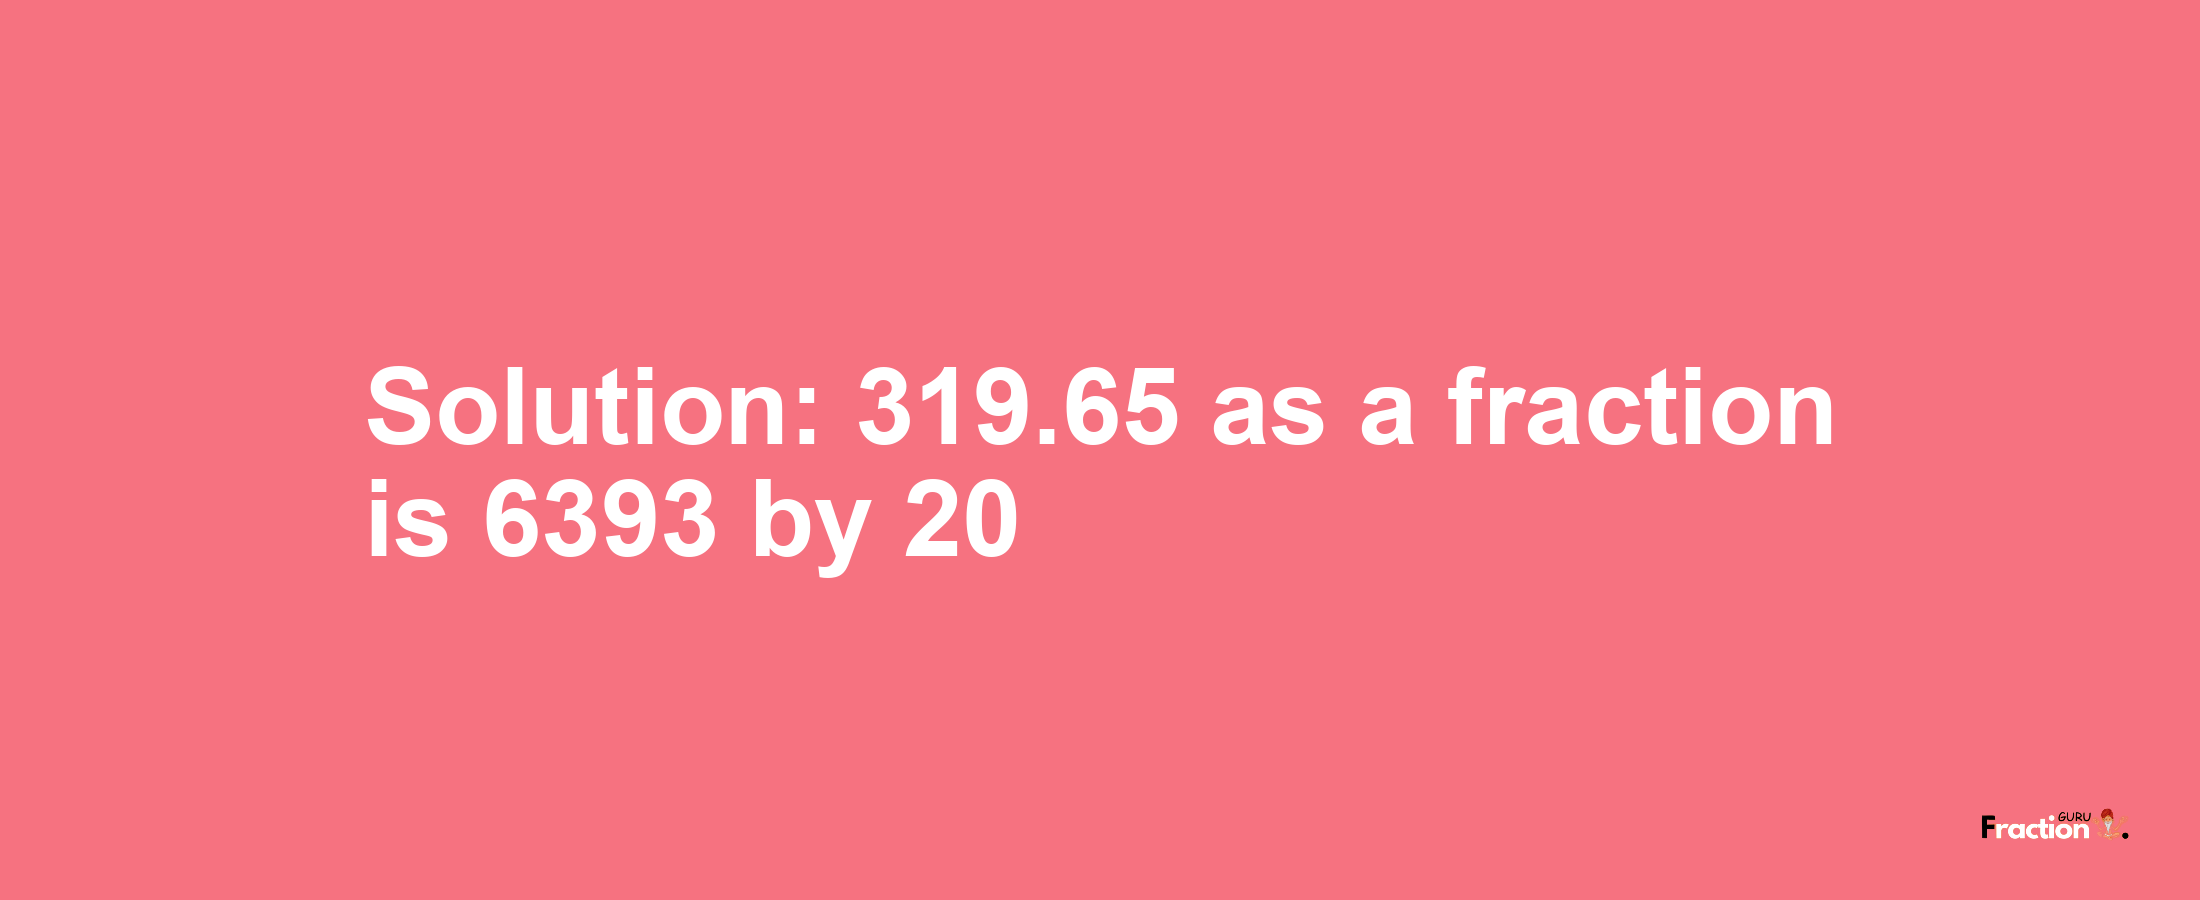 Solution:319.65 as a fraction is 6393/20